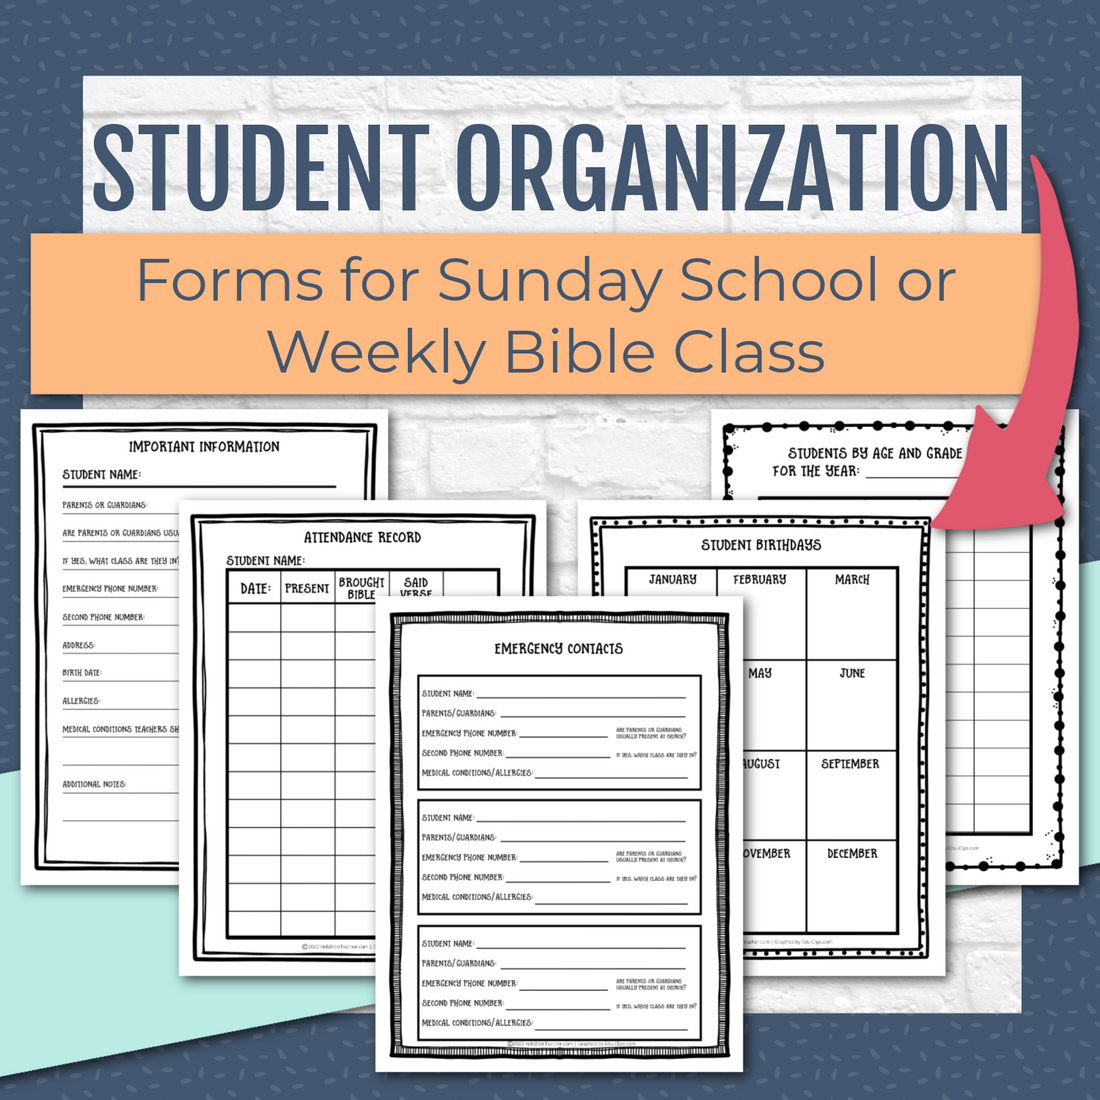 Student Organization Forms for Sunday School or Weekly Bible Class